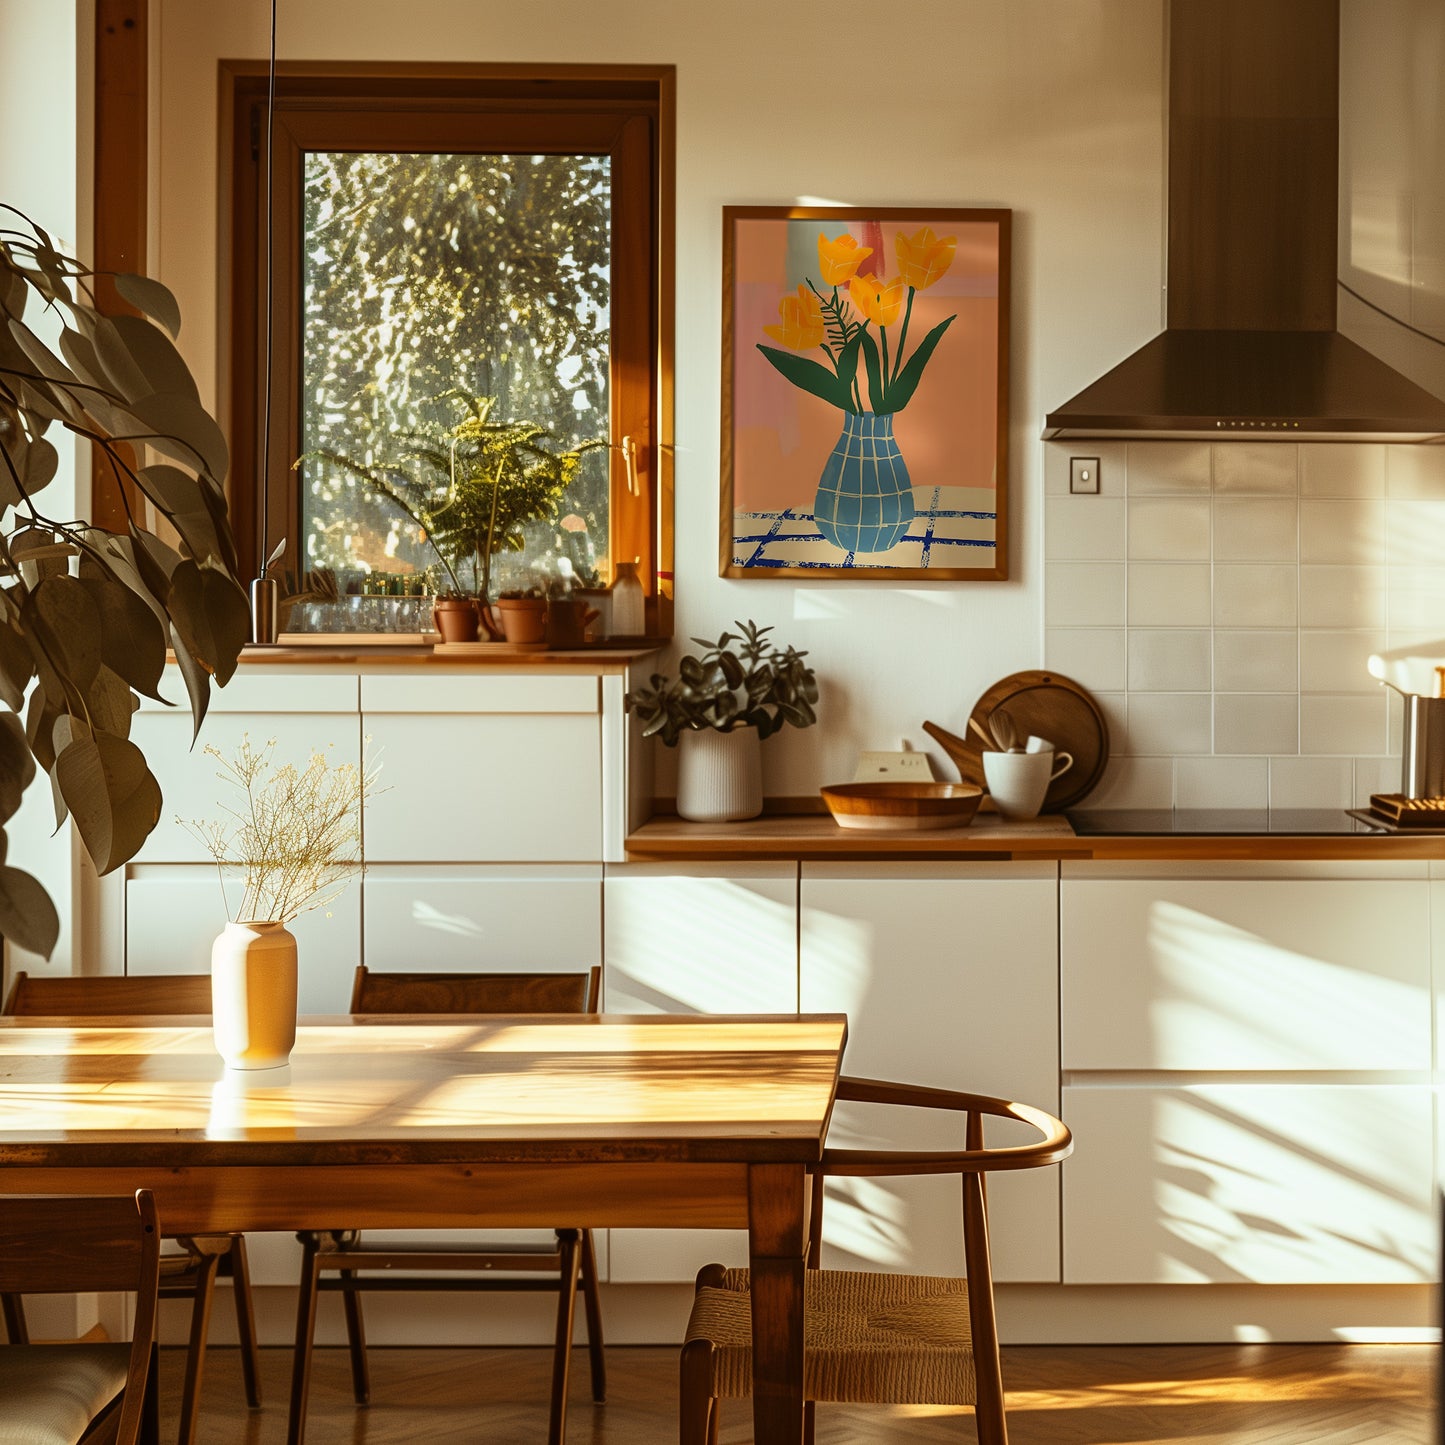 A cozy, sunlit kitchen with plants and a painting on the wall.